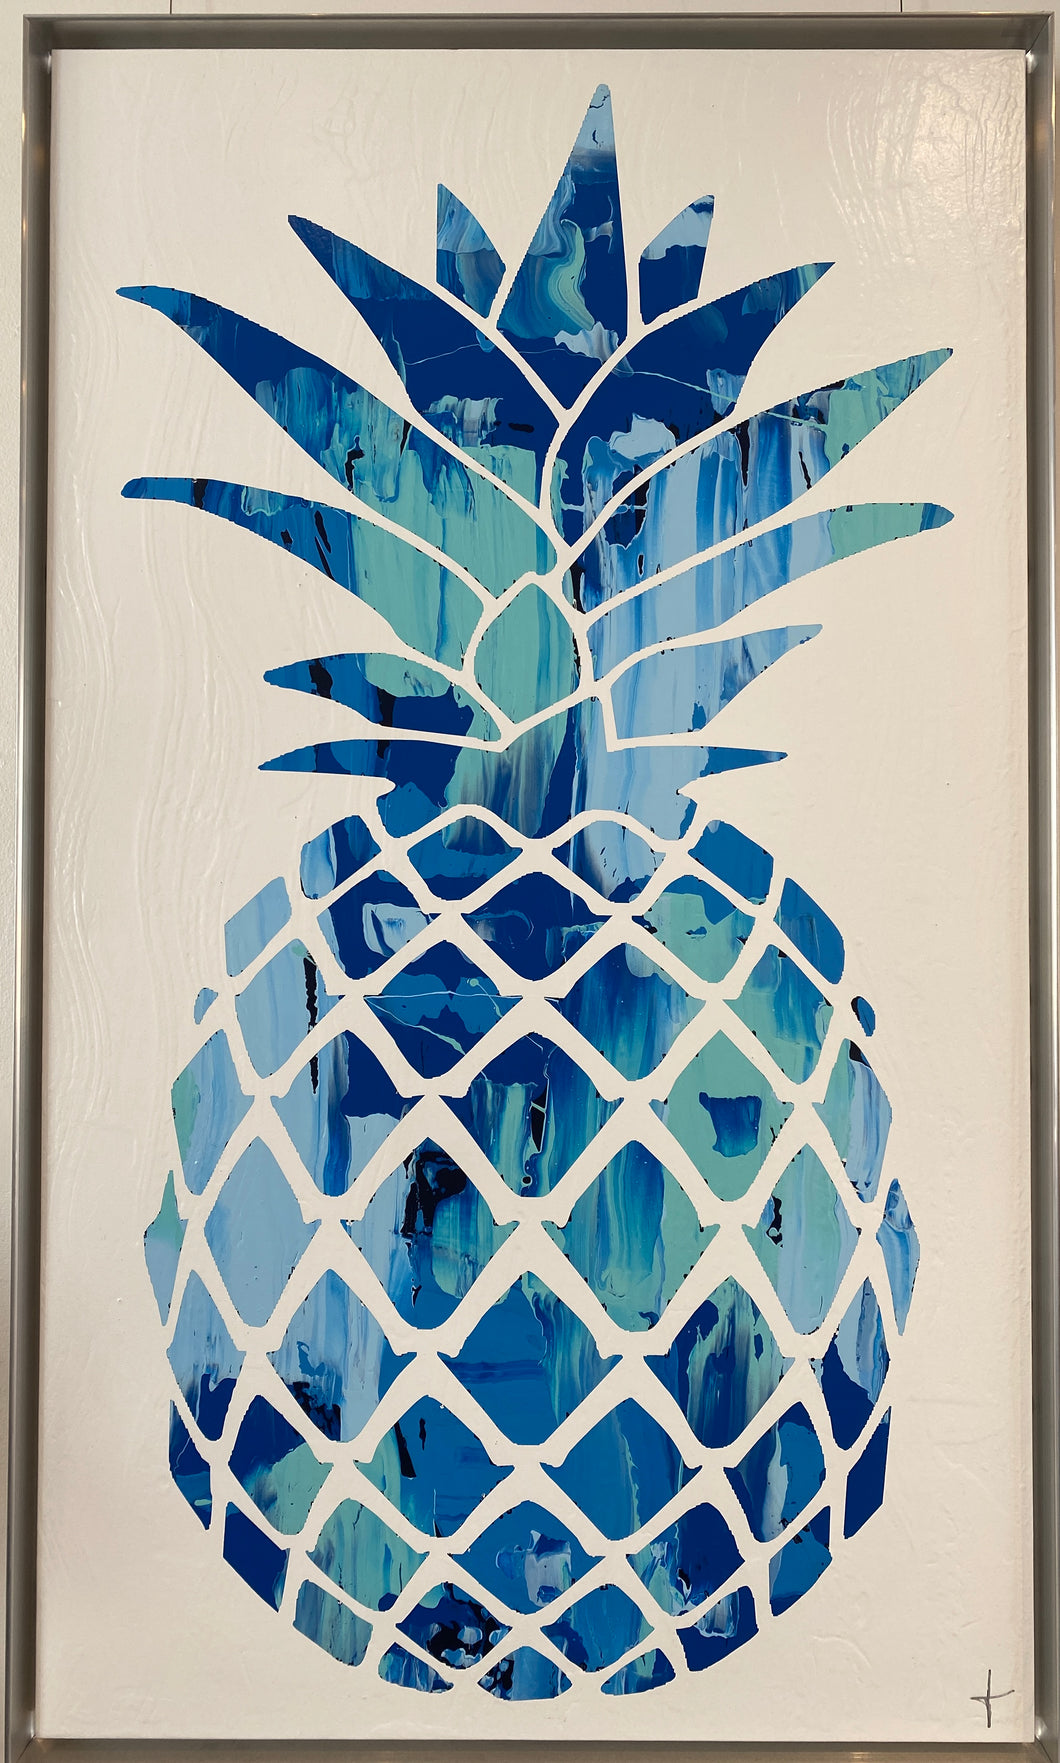 Framed Blue Pineapple Painting - Stephen Young